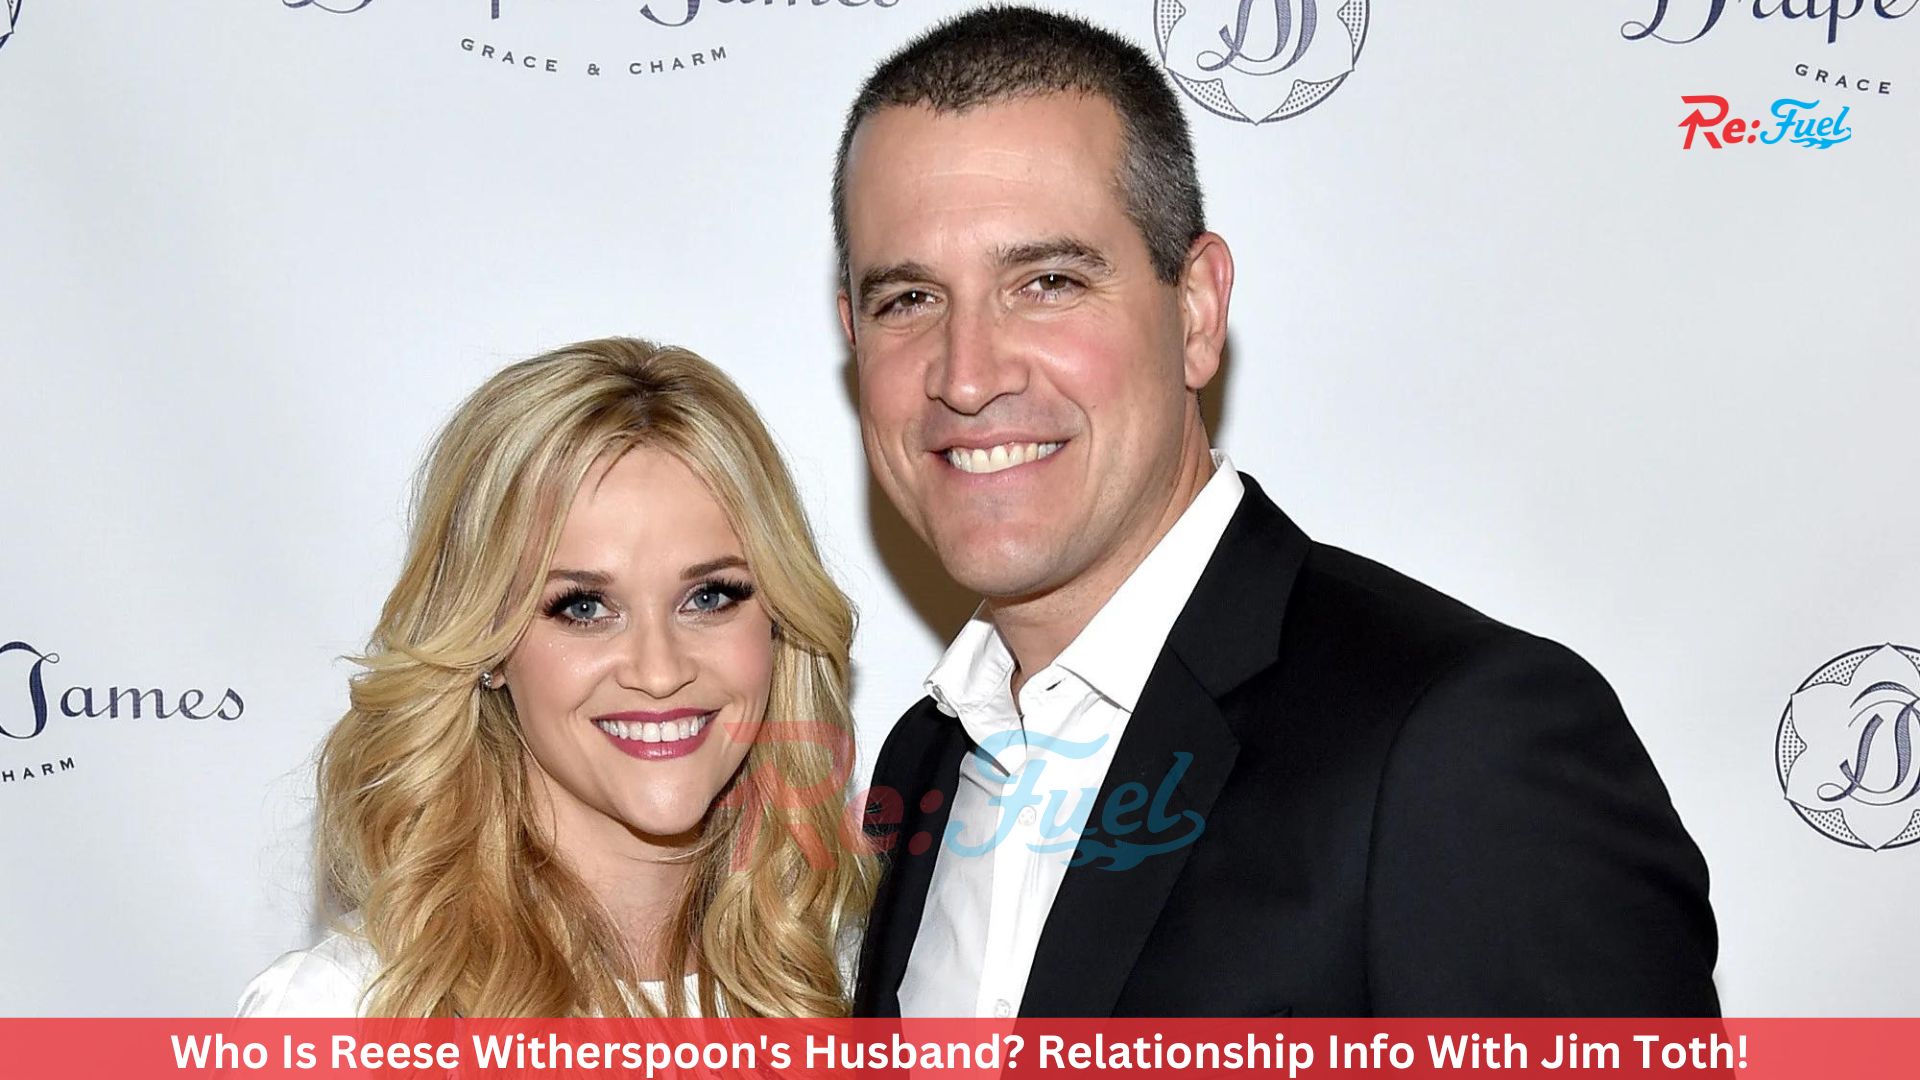 Who Is Reese Witherspoon's Husband? Relationship Info With Jim Toth!